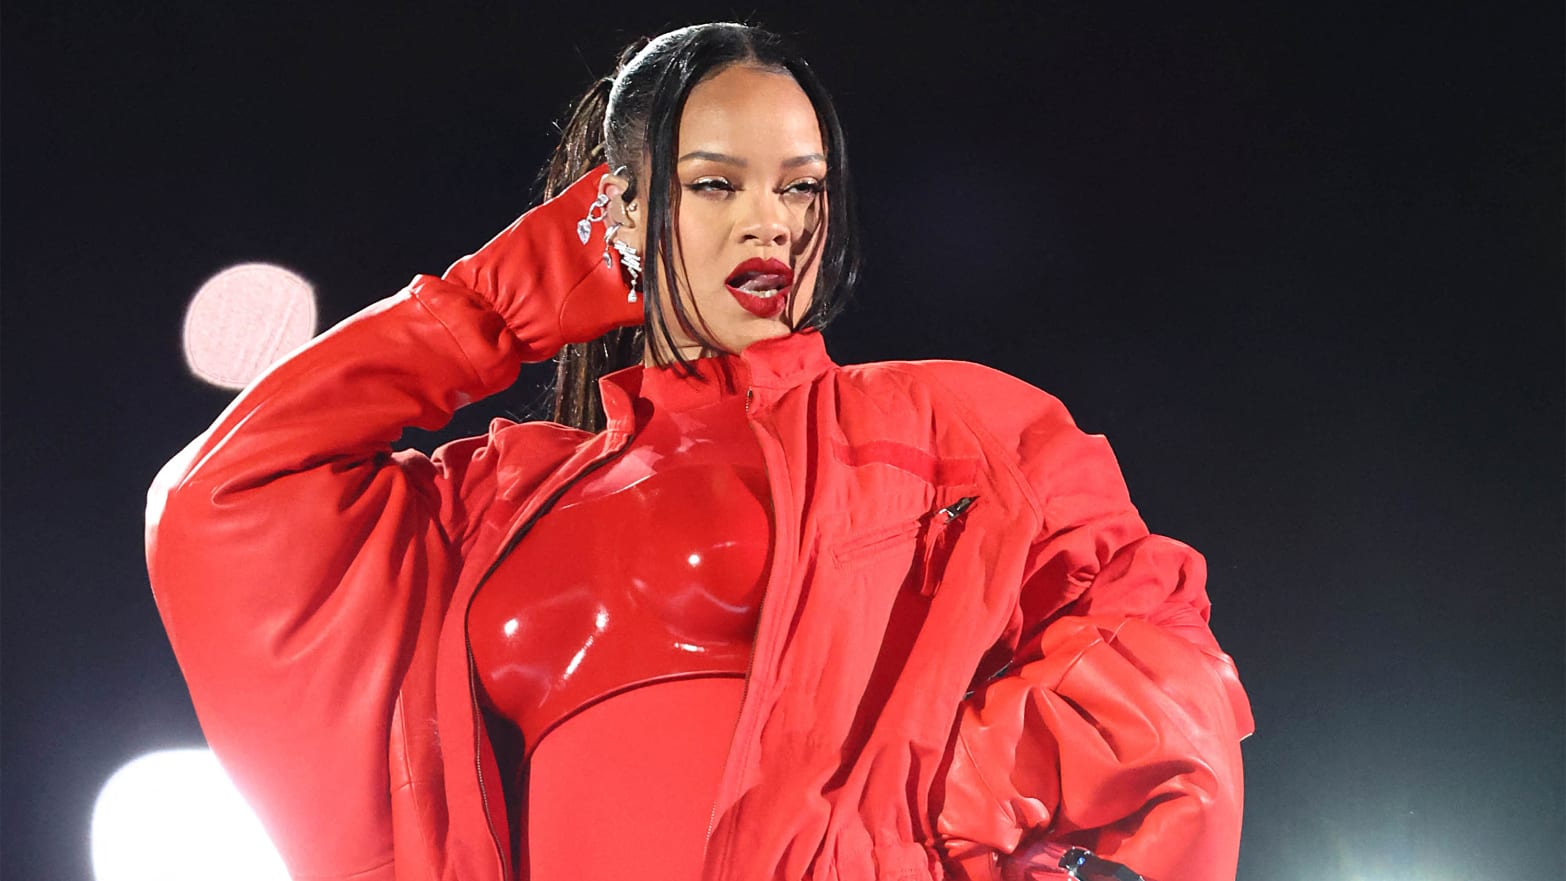 Pregnant Rihanna’s Super Bowl Halftime Show Review: An Icon at the Top ...